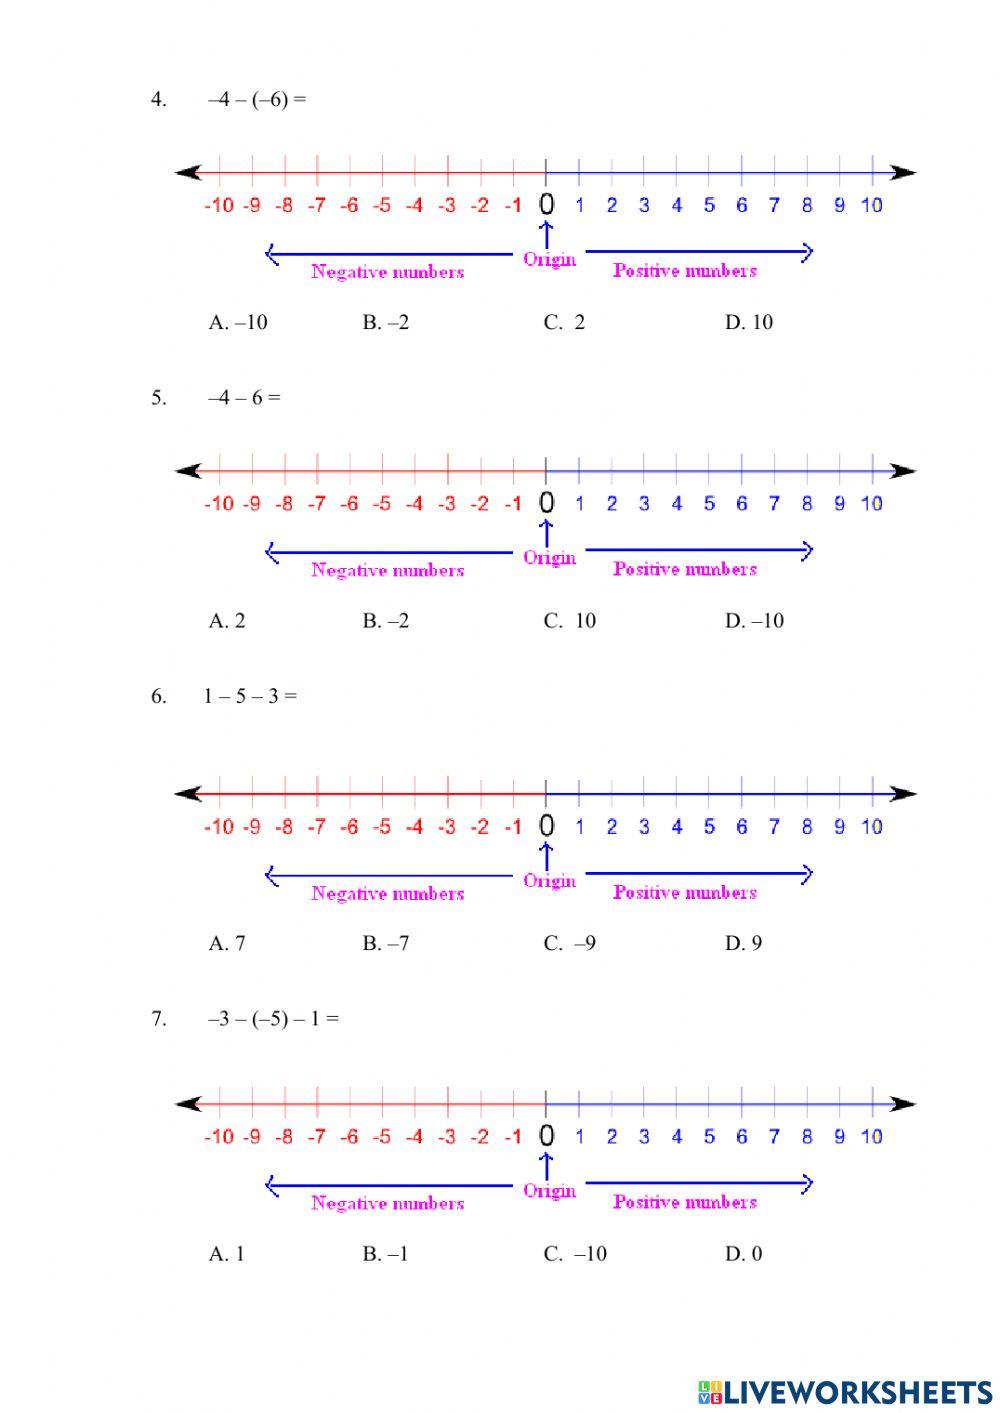 Subtraction of Integers using Number Line